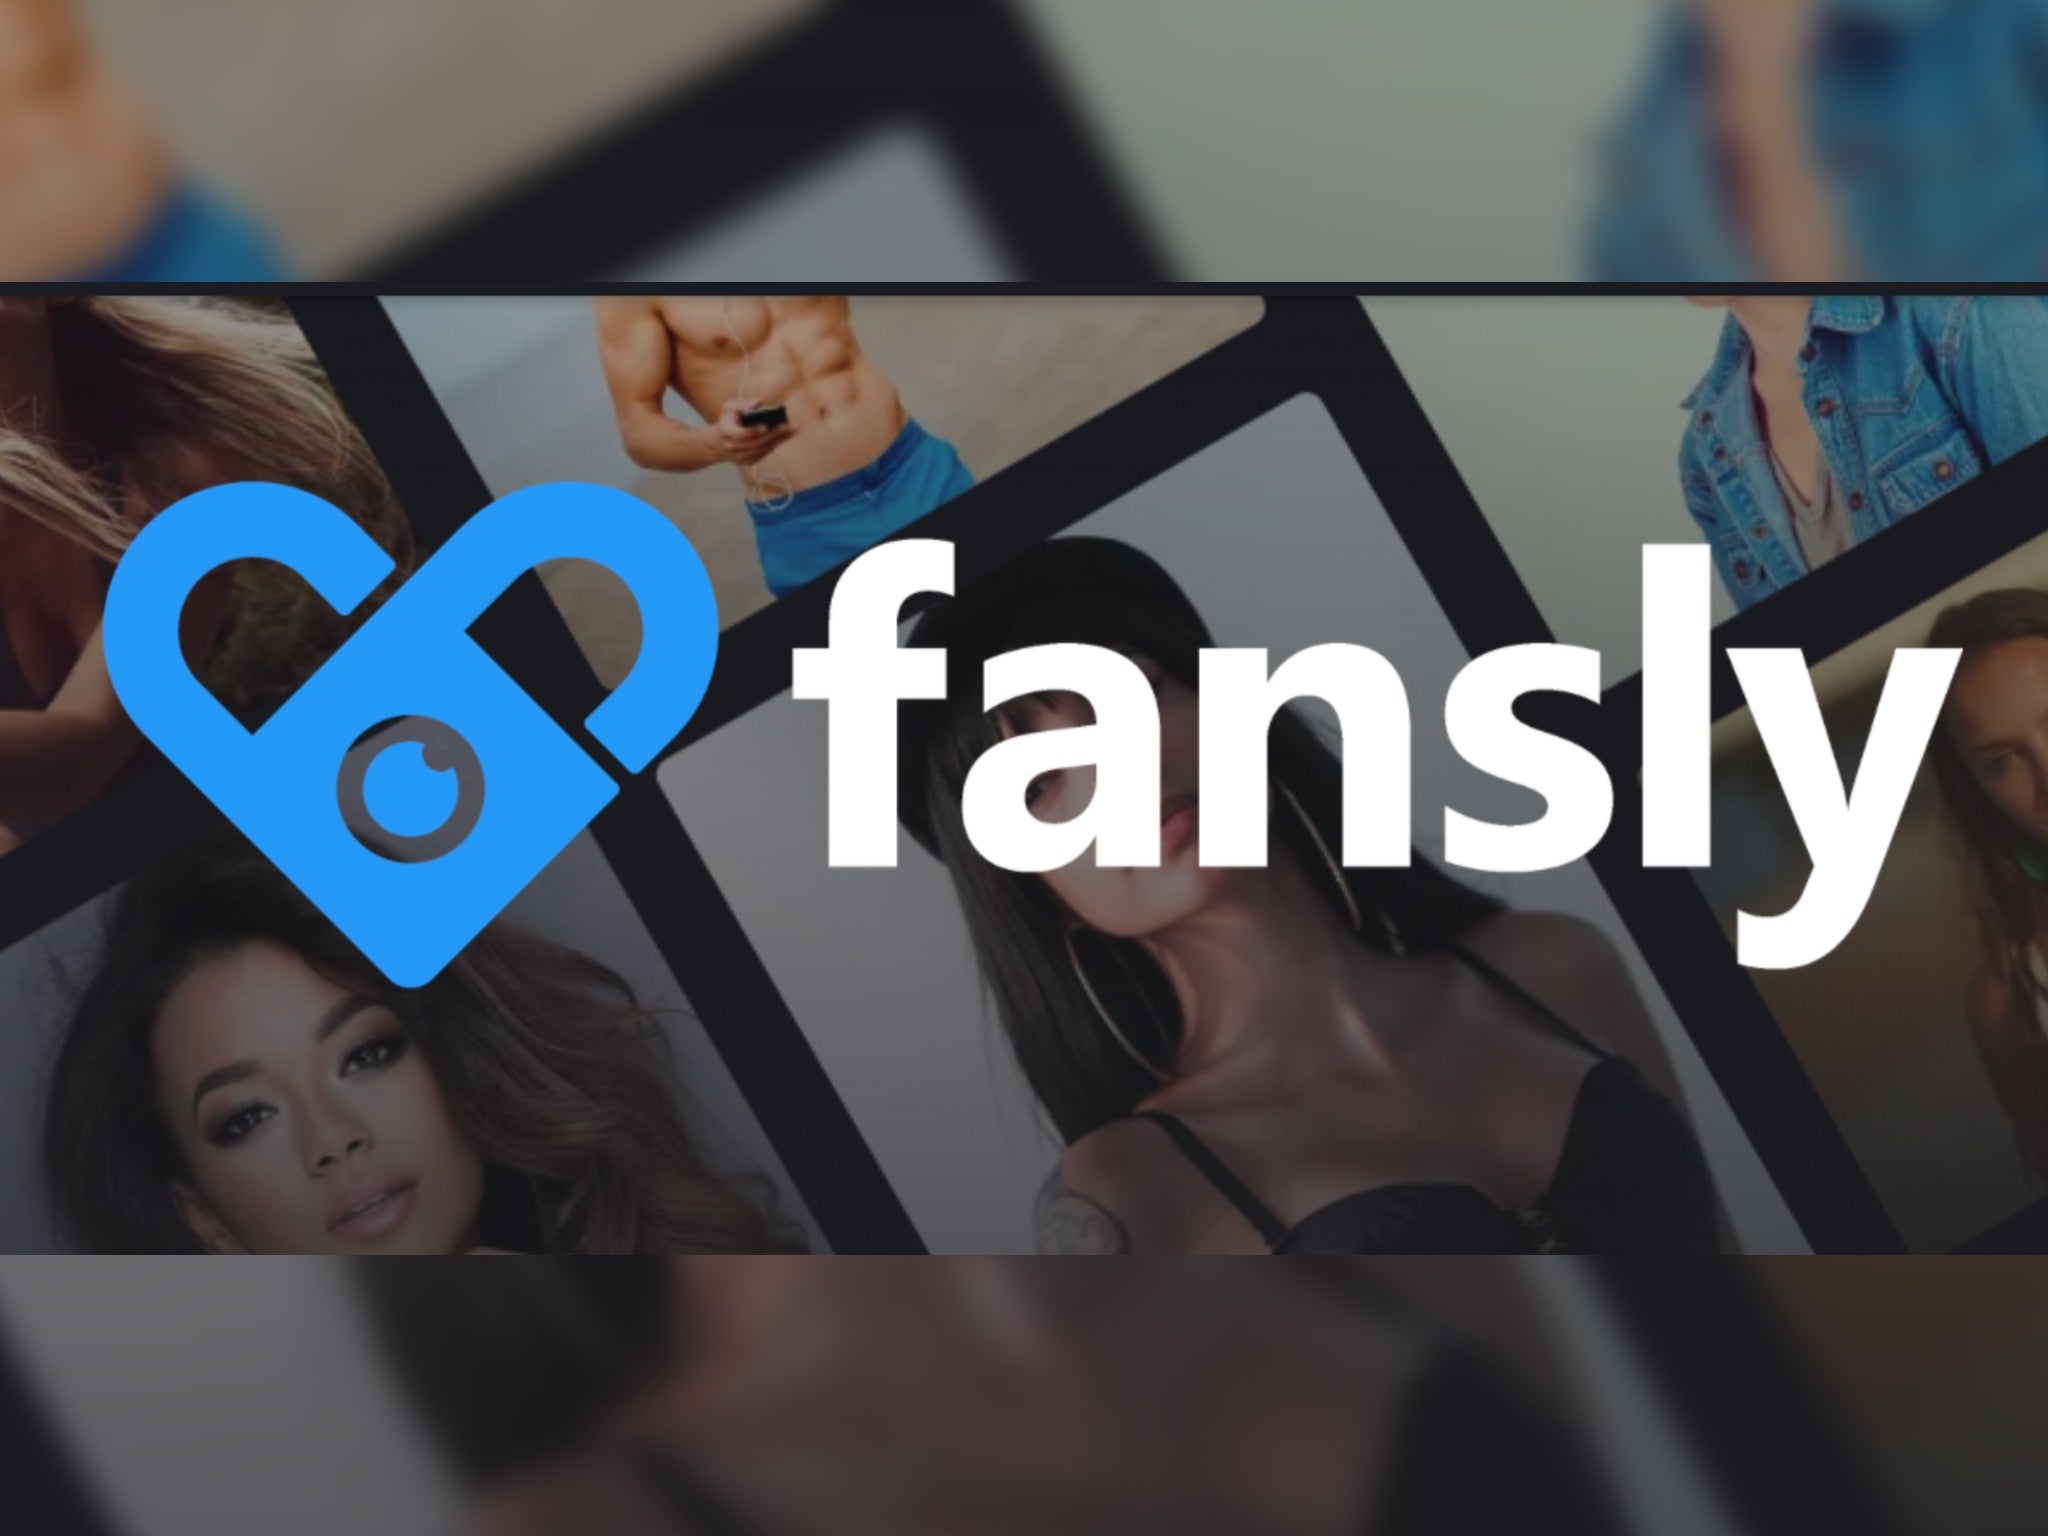 How to verify an onlyfans account